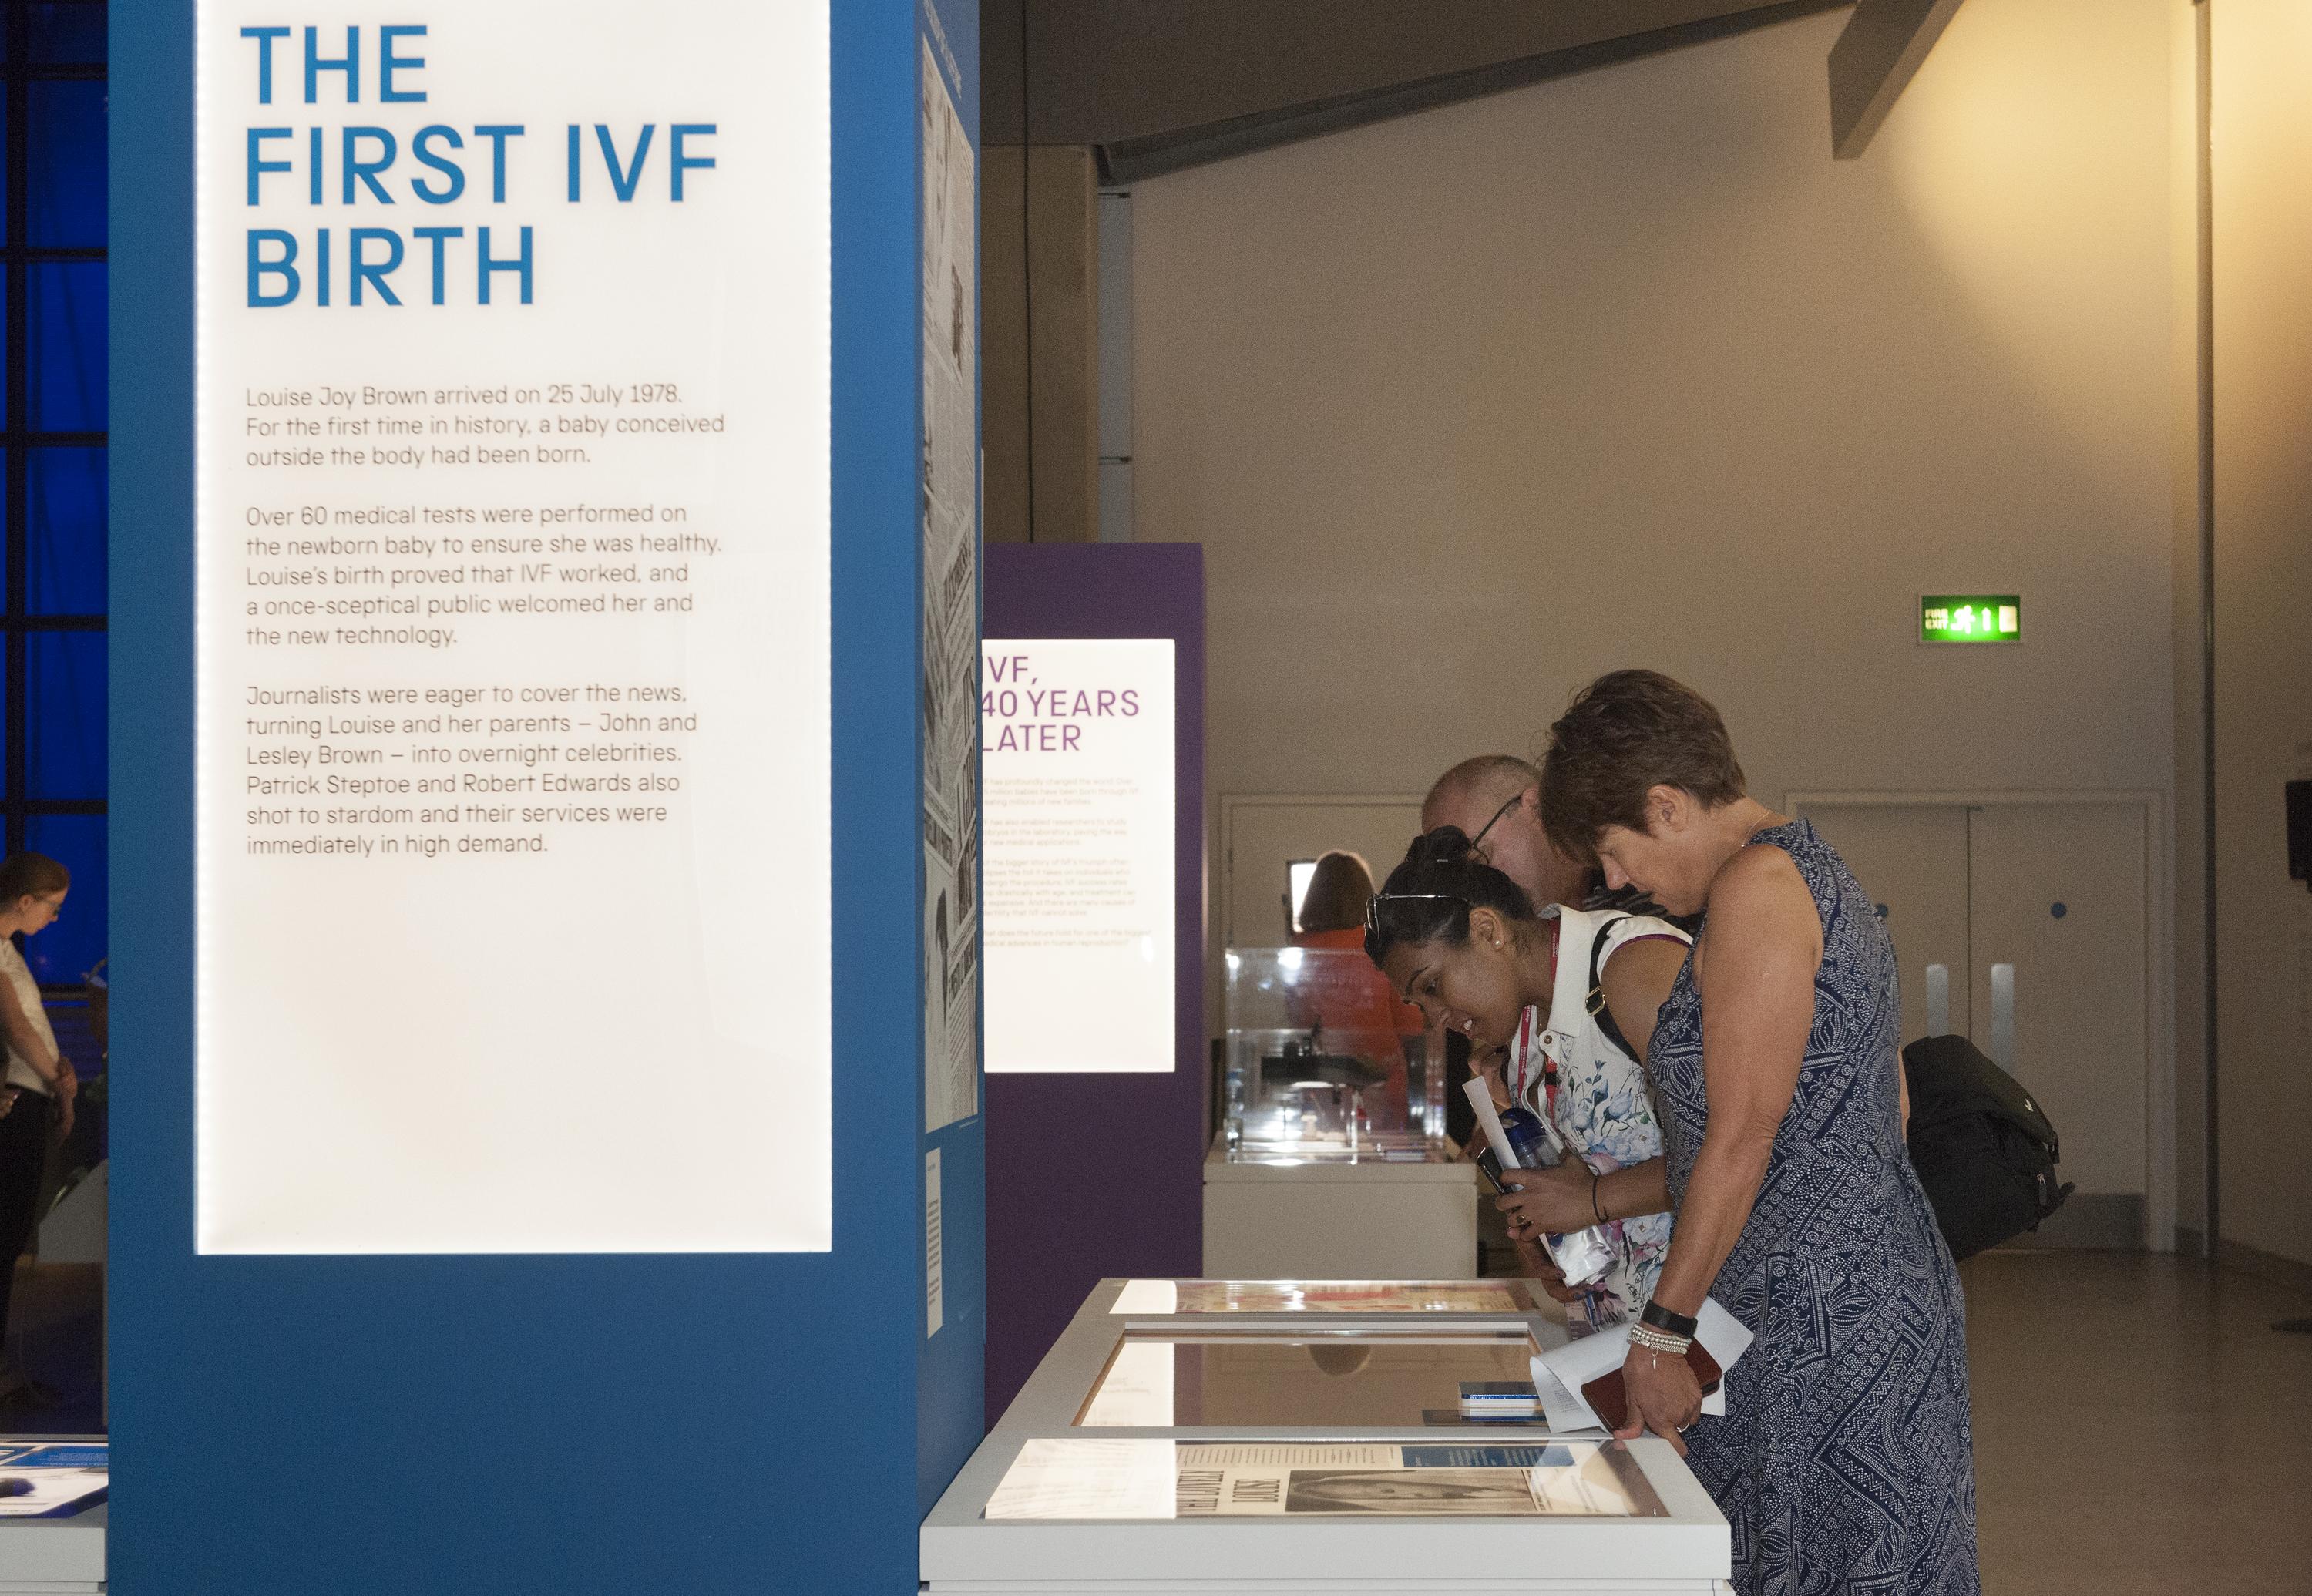 Invited guests attending IVF: 6 Million Babies Later. An exhibition marking the 40th anniversary of the 'miraculous' birth of Louise Brown on 25 July 1978. The exhibition explores the ten years of testing, hundreds of failed attempts and many setbacks faced by Robert Edwards, Patrick Steptoe and Jean Purdy, in their quest to treat infertility and achieve the first successful IVF birth.